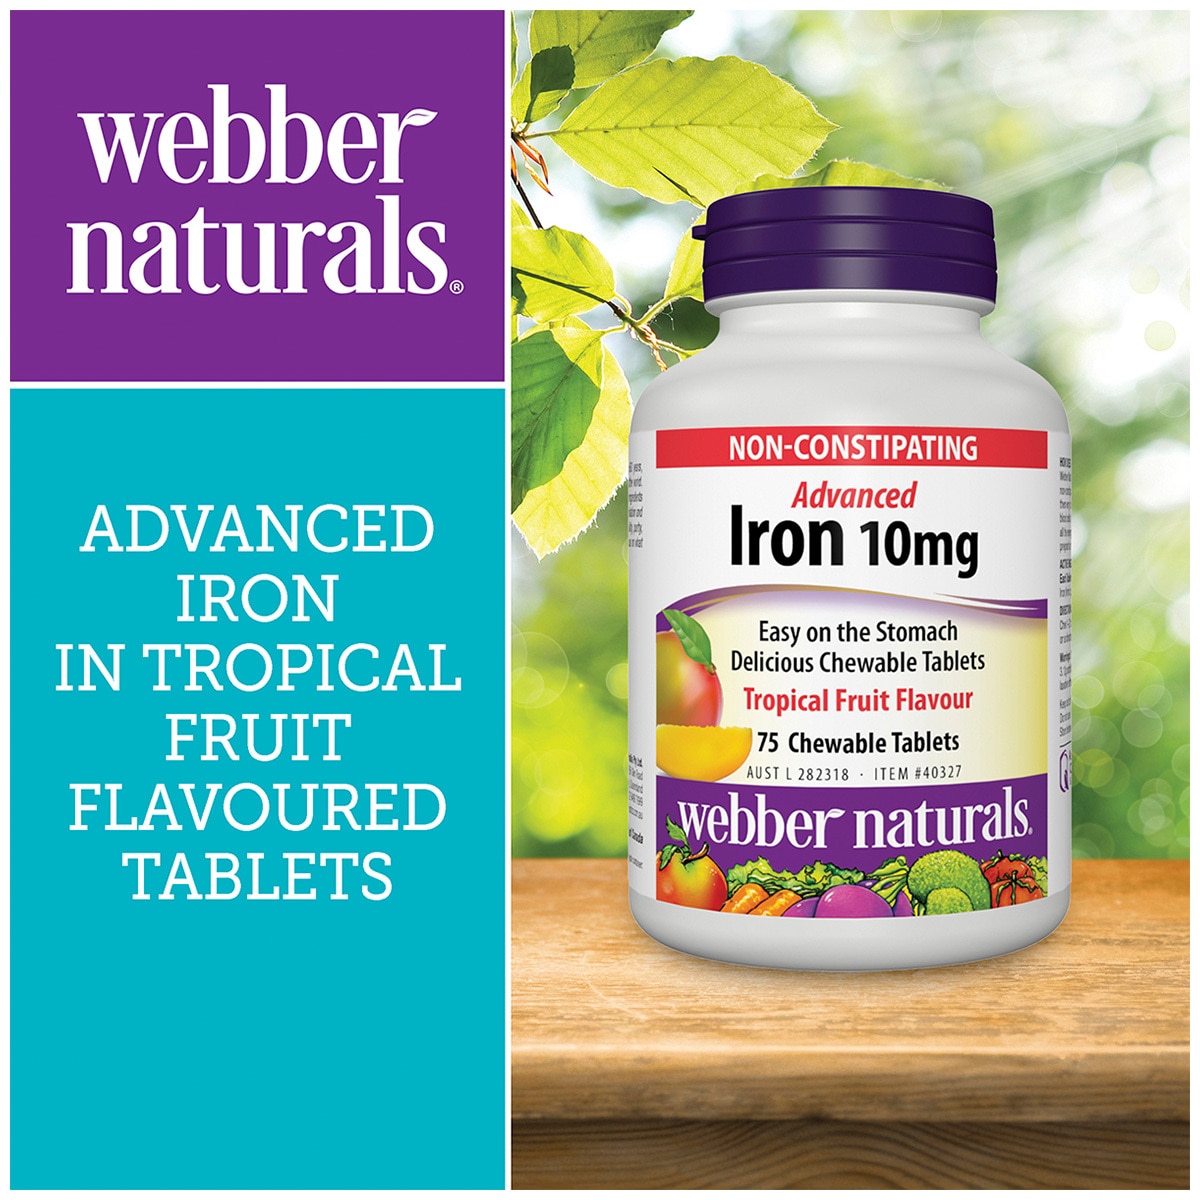 Webber Naturals Advanced Iron 10mg 75 Chewable Tabs